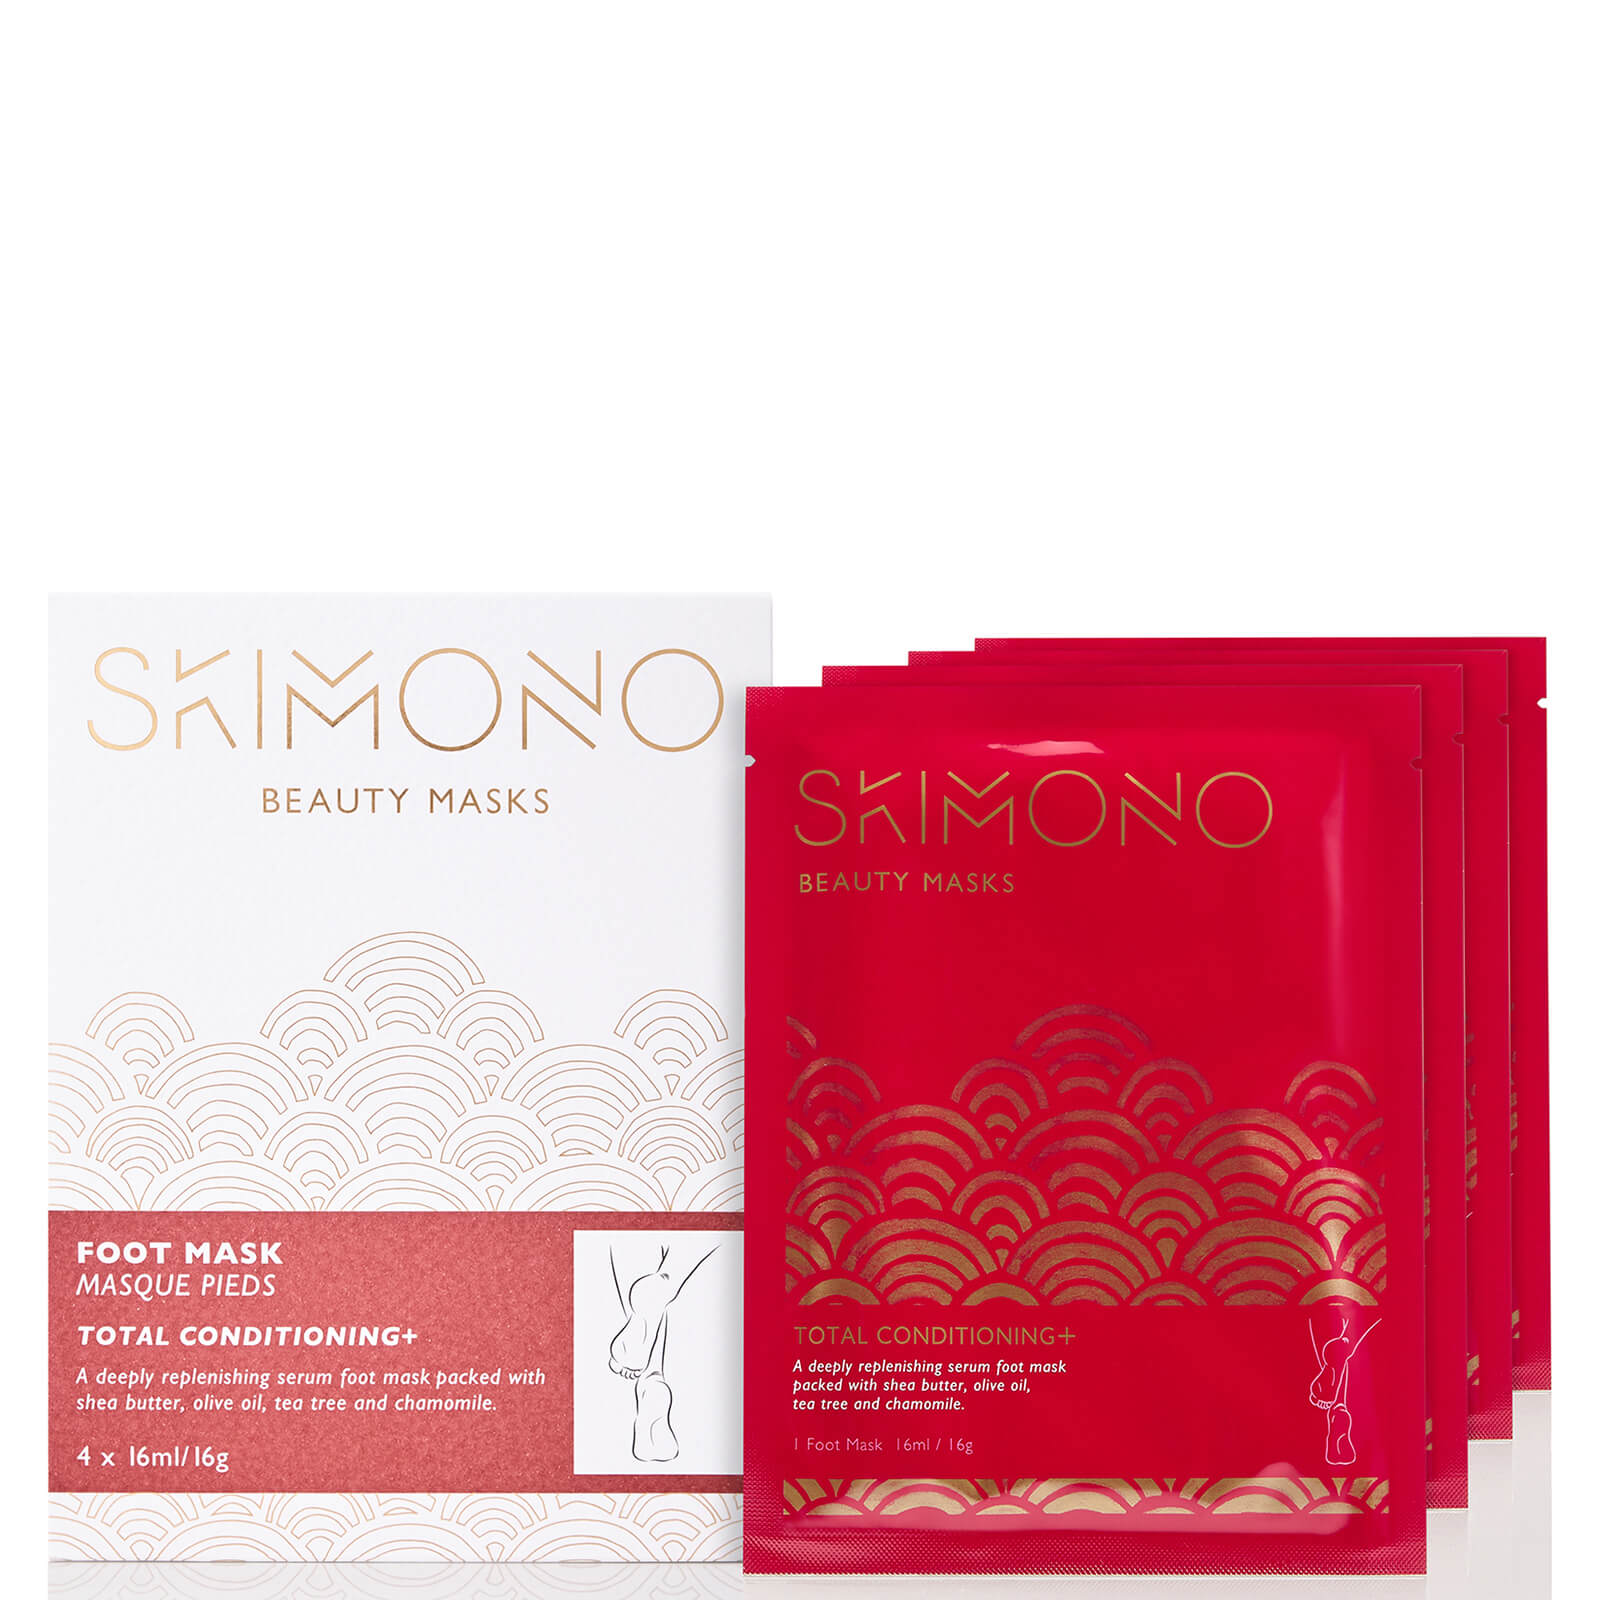 Skimono Beauty Foot Mask for Total Conditioning 4 x 16ml